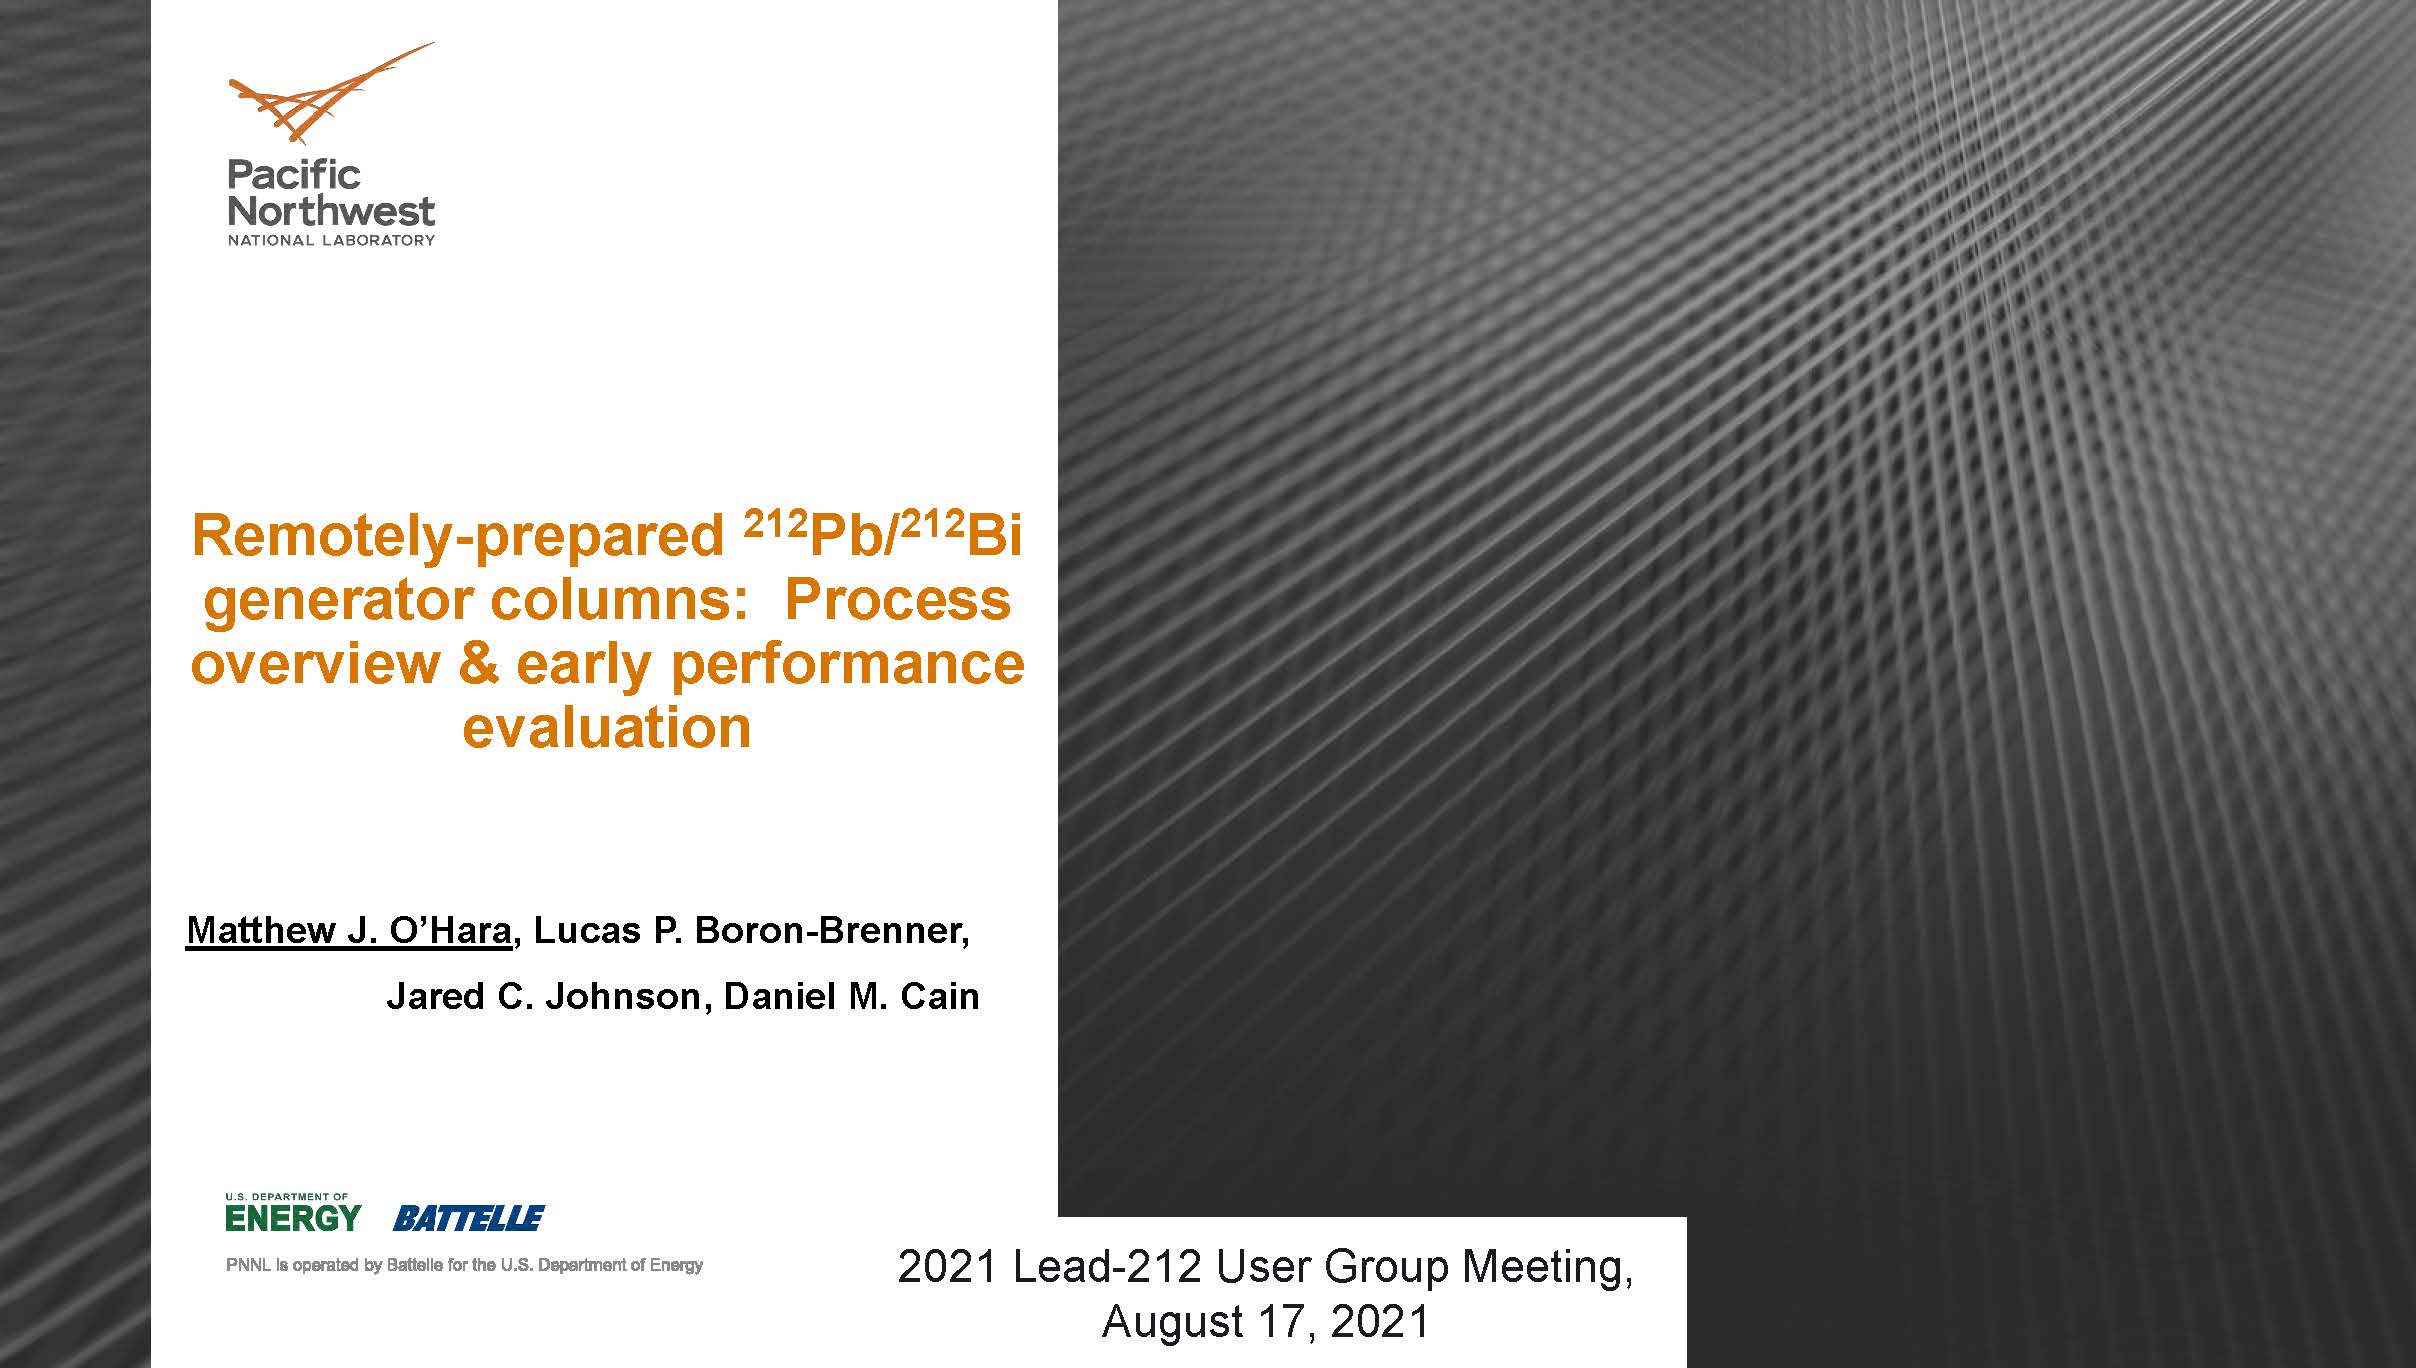 Remotely-Prepared Pb-212/Bi-212 Generator Columns: Process Overview & Early Performance Evaluation by Dr. Matt O'Hara, Pacific Northwest National Laboratory